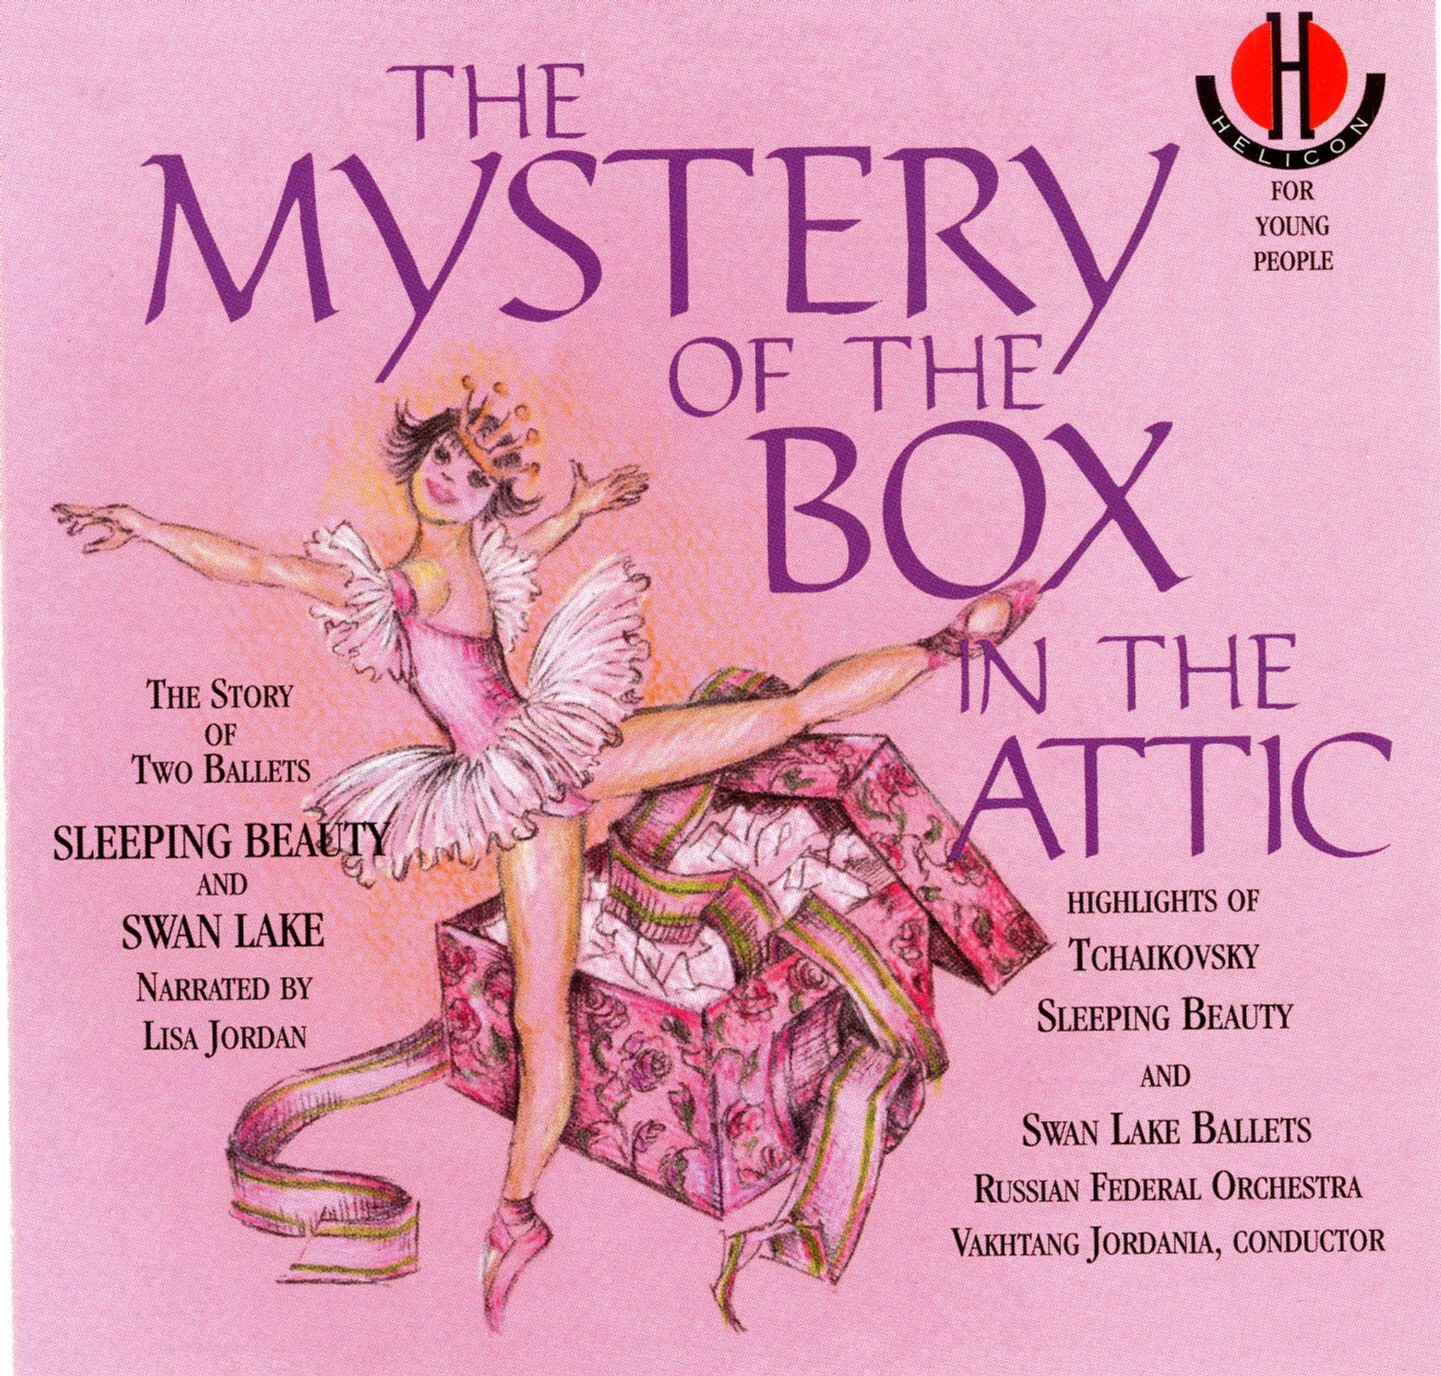 HE1046: The Mystery of the Box in the Attic